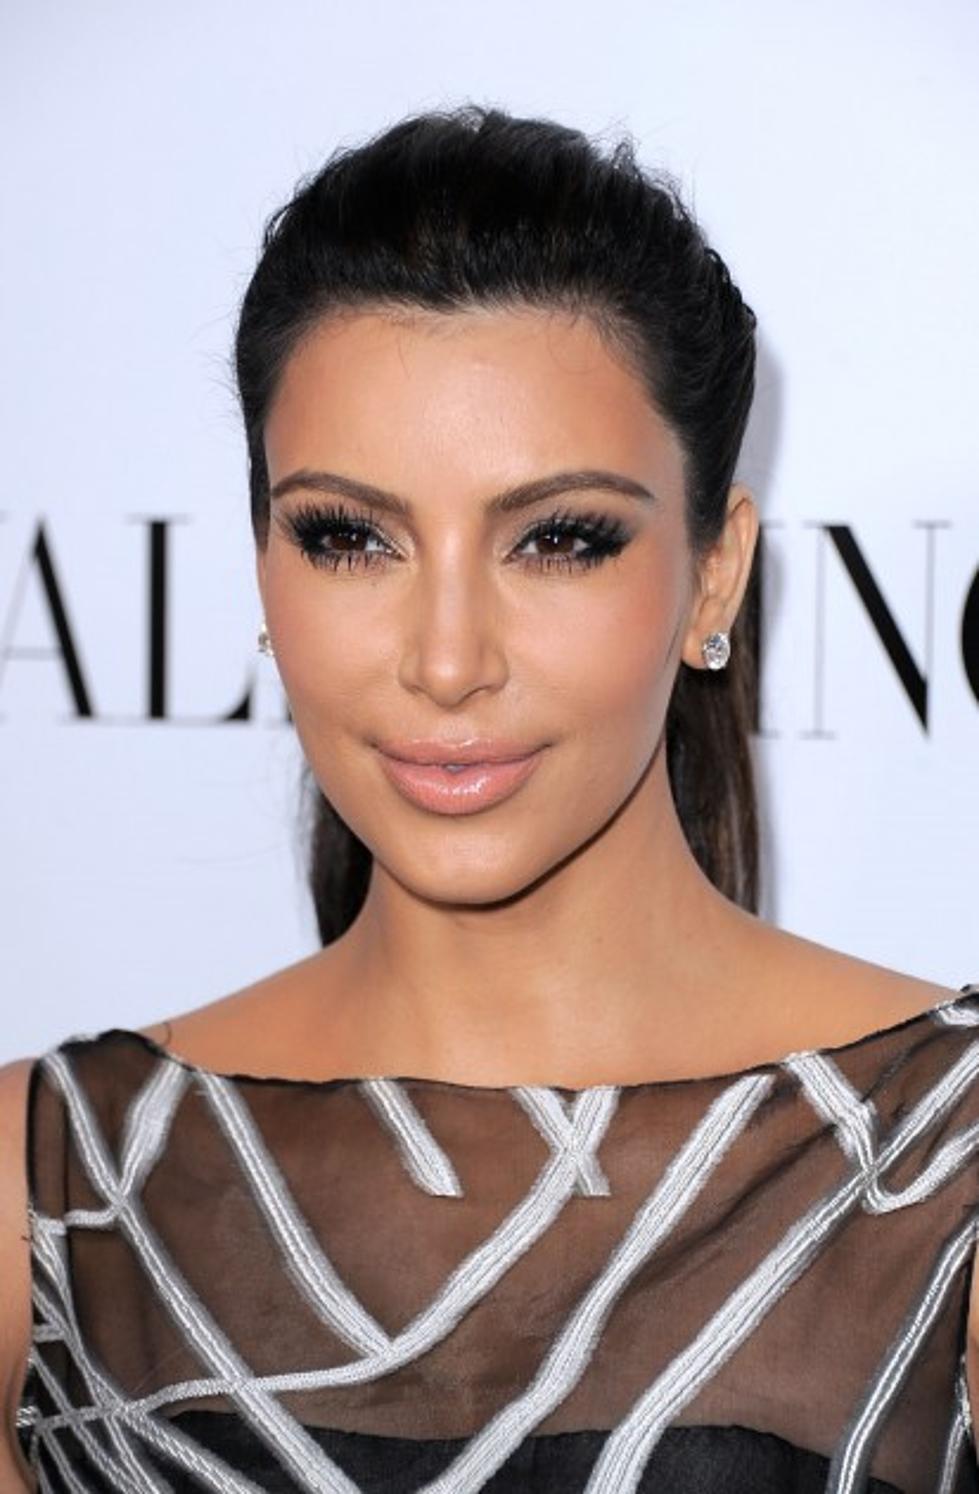 Kim Kardashian Is The Most Overexposed Celebrity